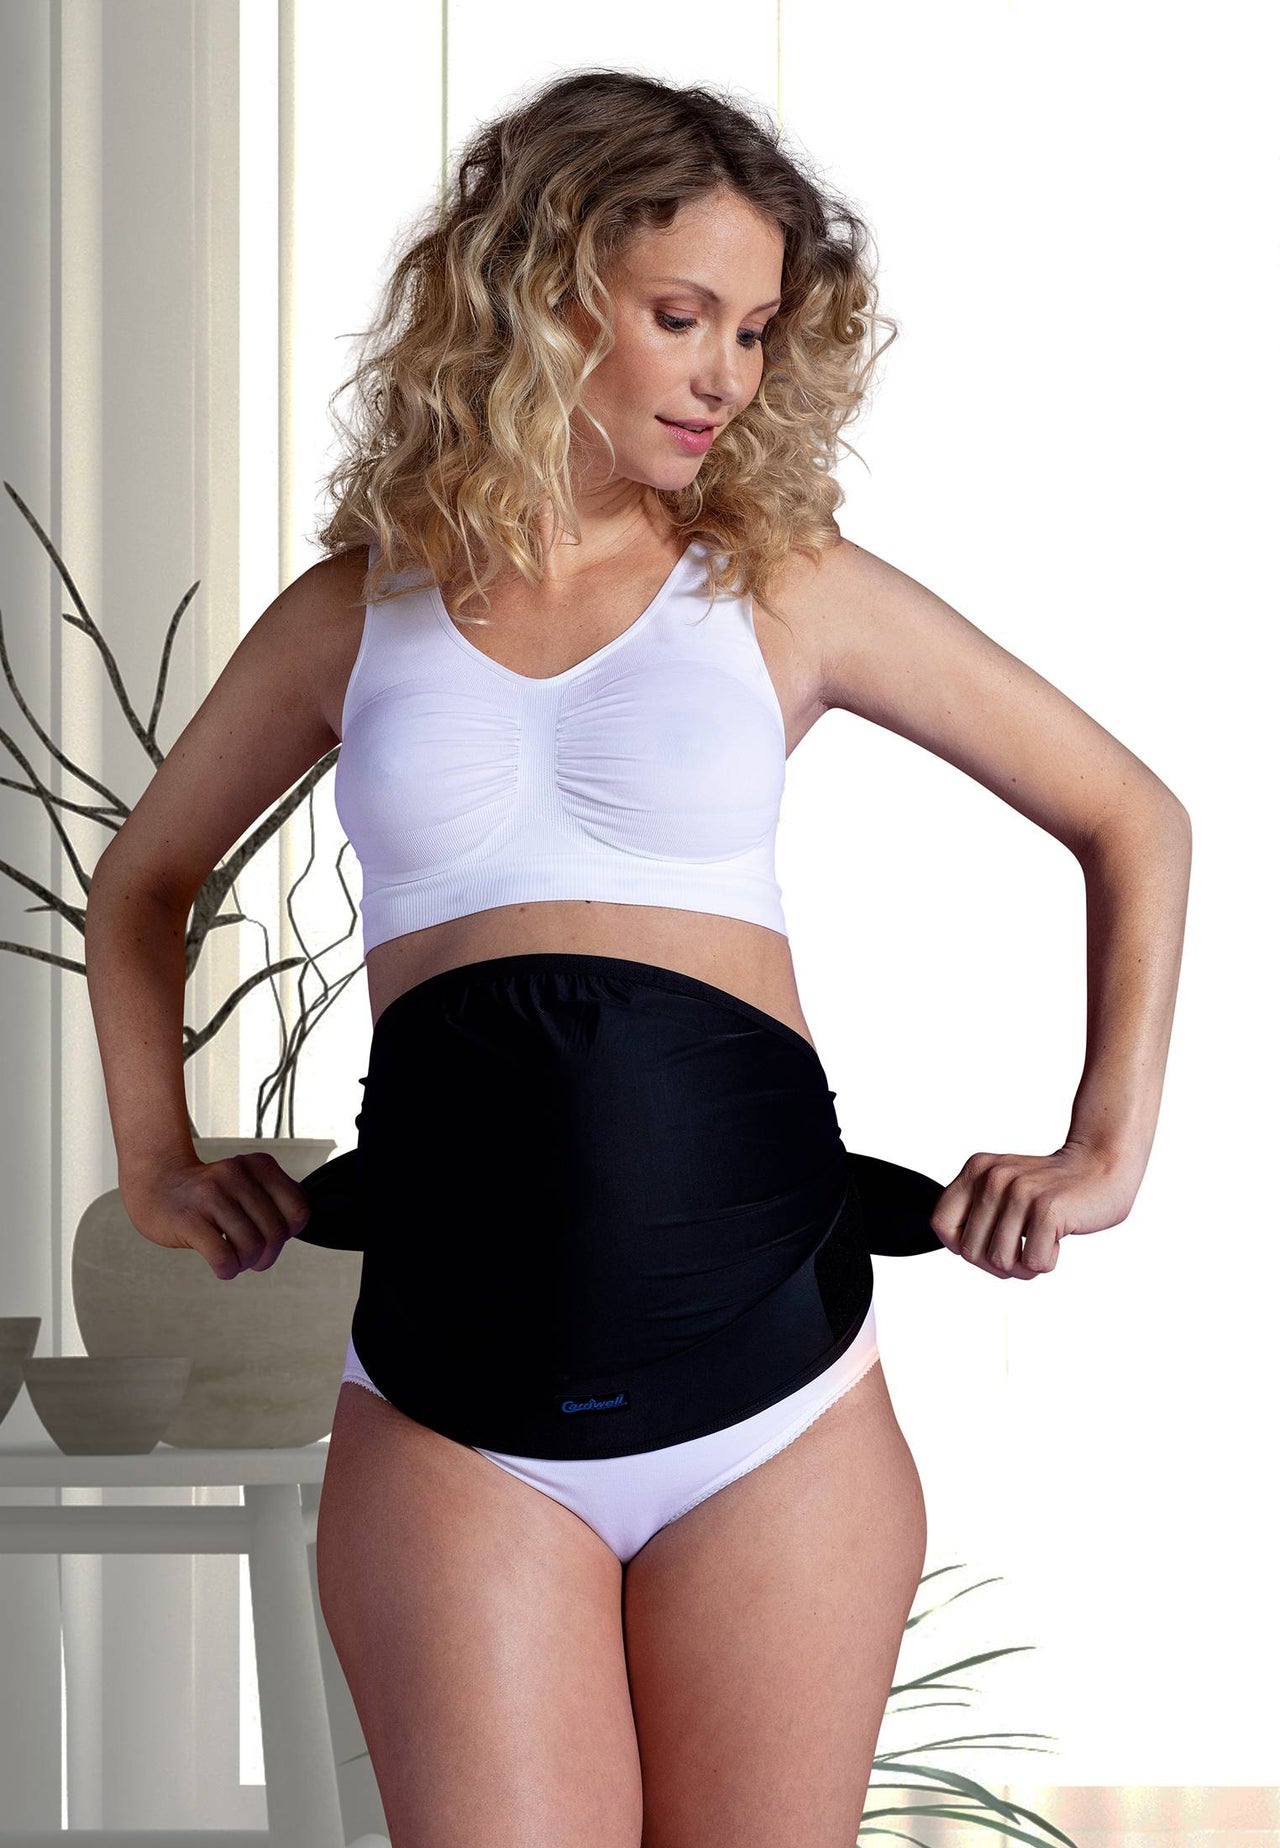 Adjustable Overbelly Support Belt Small to Medium - Black